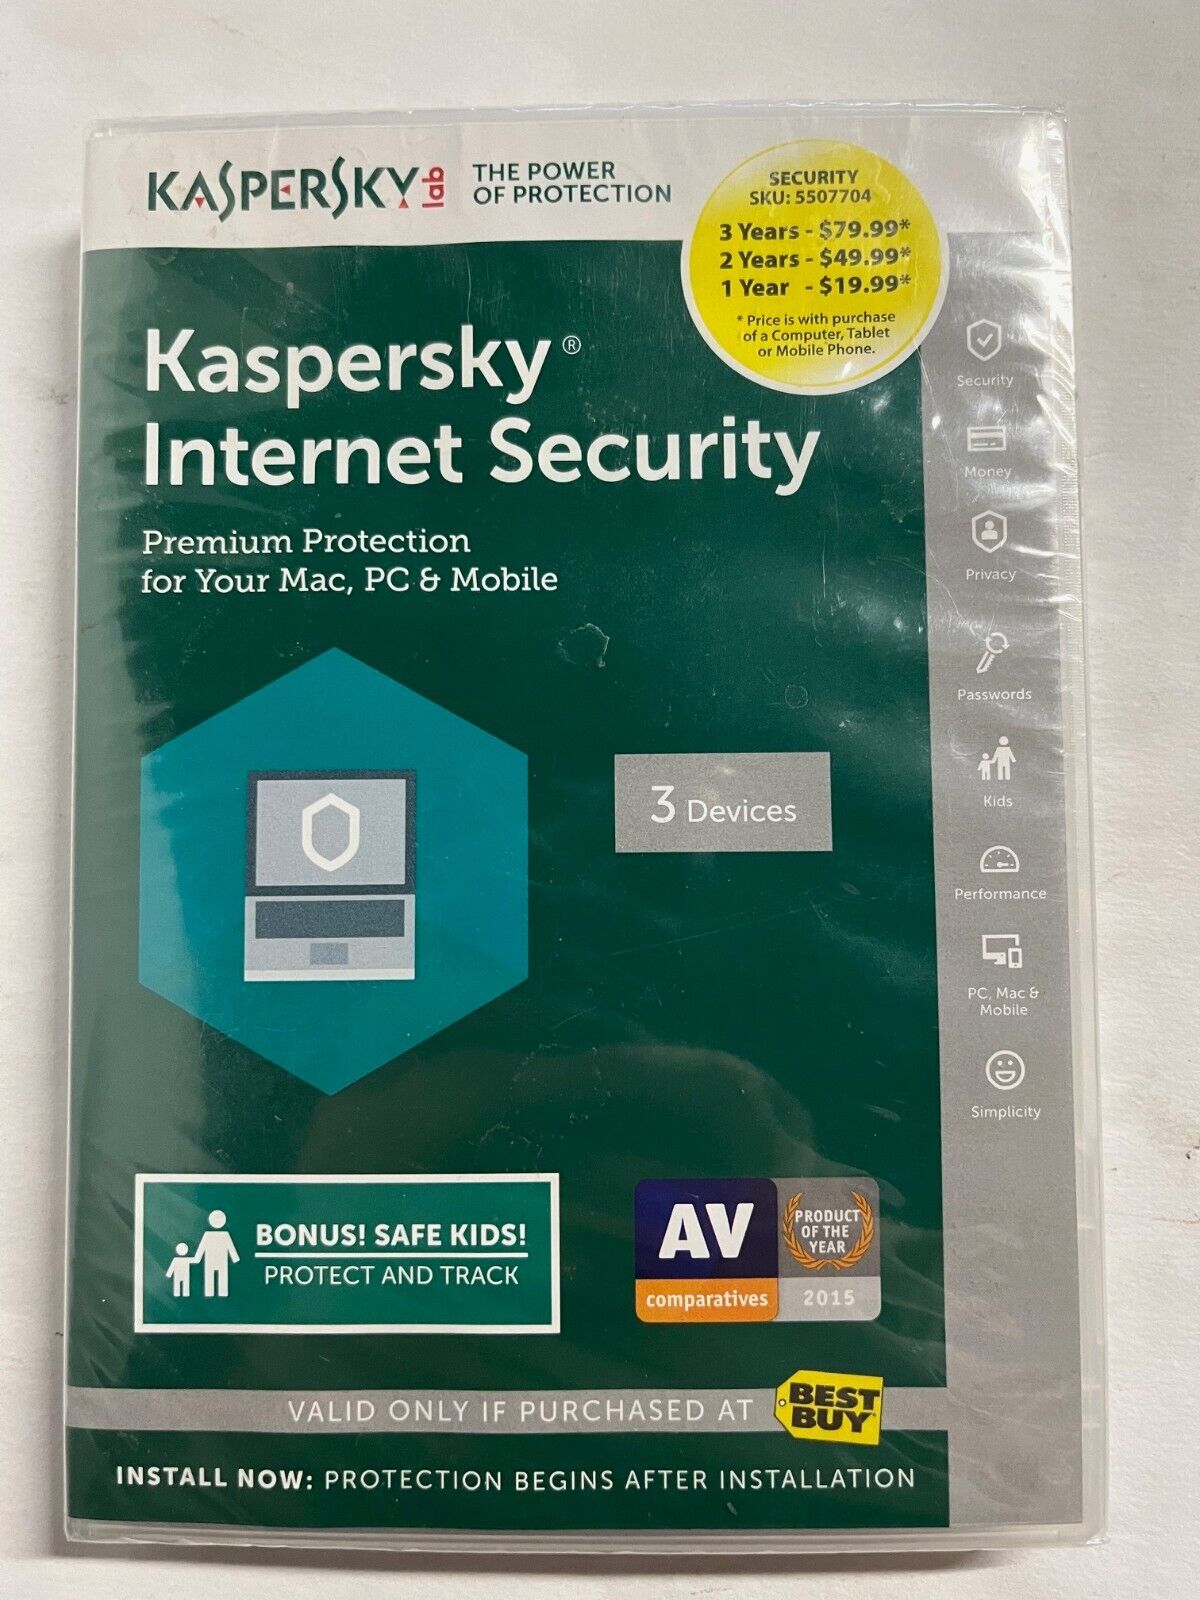 NEW Kaspersky Total Security 3 Devices Key Card Code Anti-Virus Software